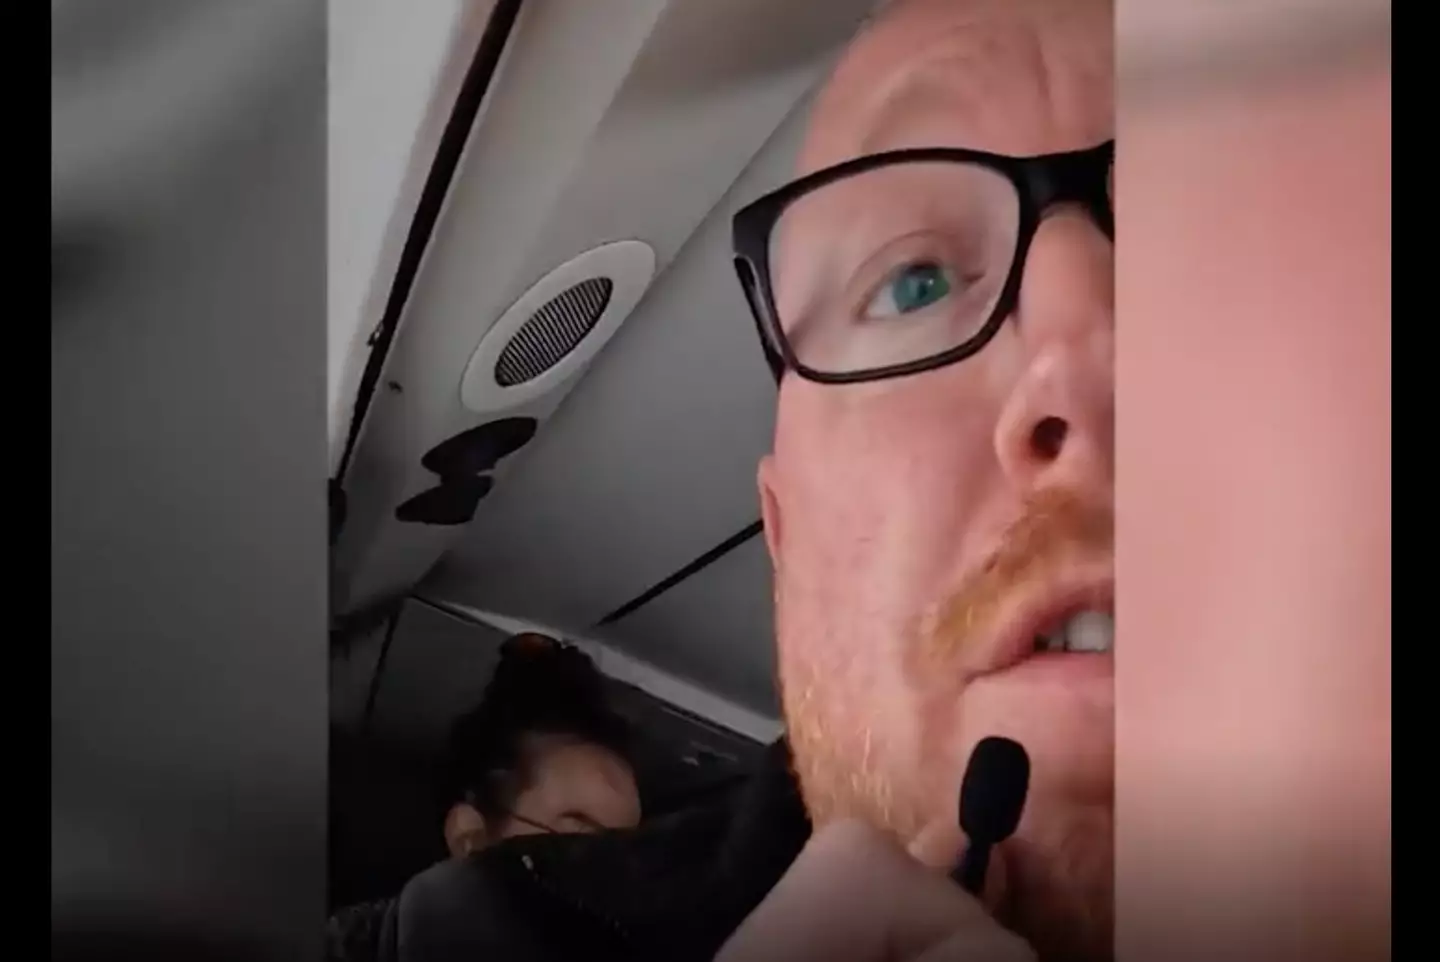 Vlogging pilot Noel Phillips documented the whole trip.